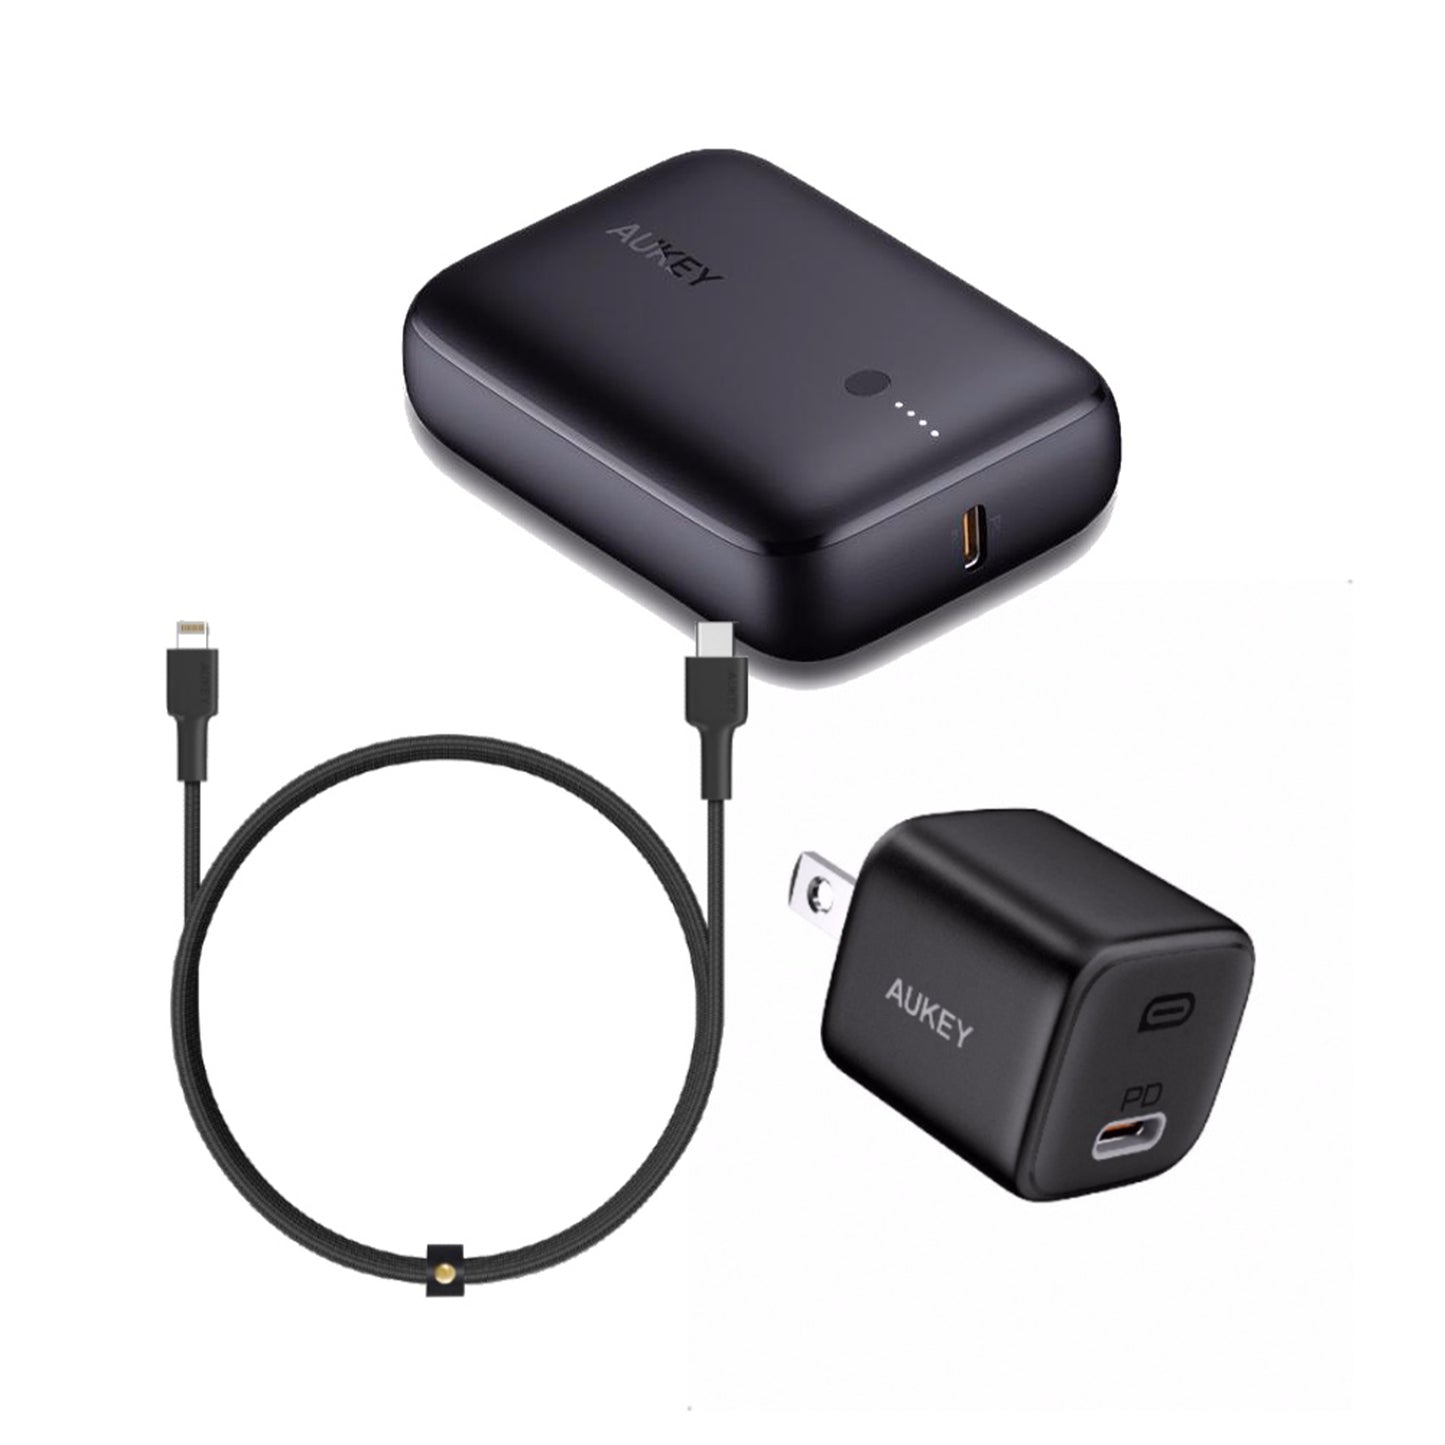 "AUKEY On-the-go Bundle (USB-C Wall Charger, 10,000mAh Powerbank, C to Lightning Cable) - Black"